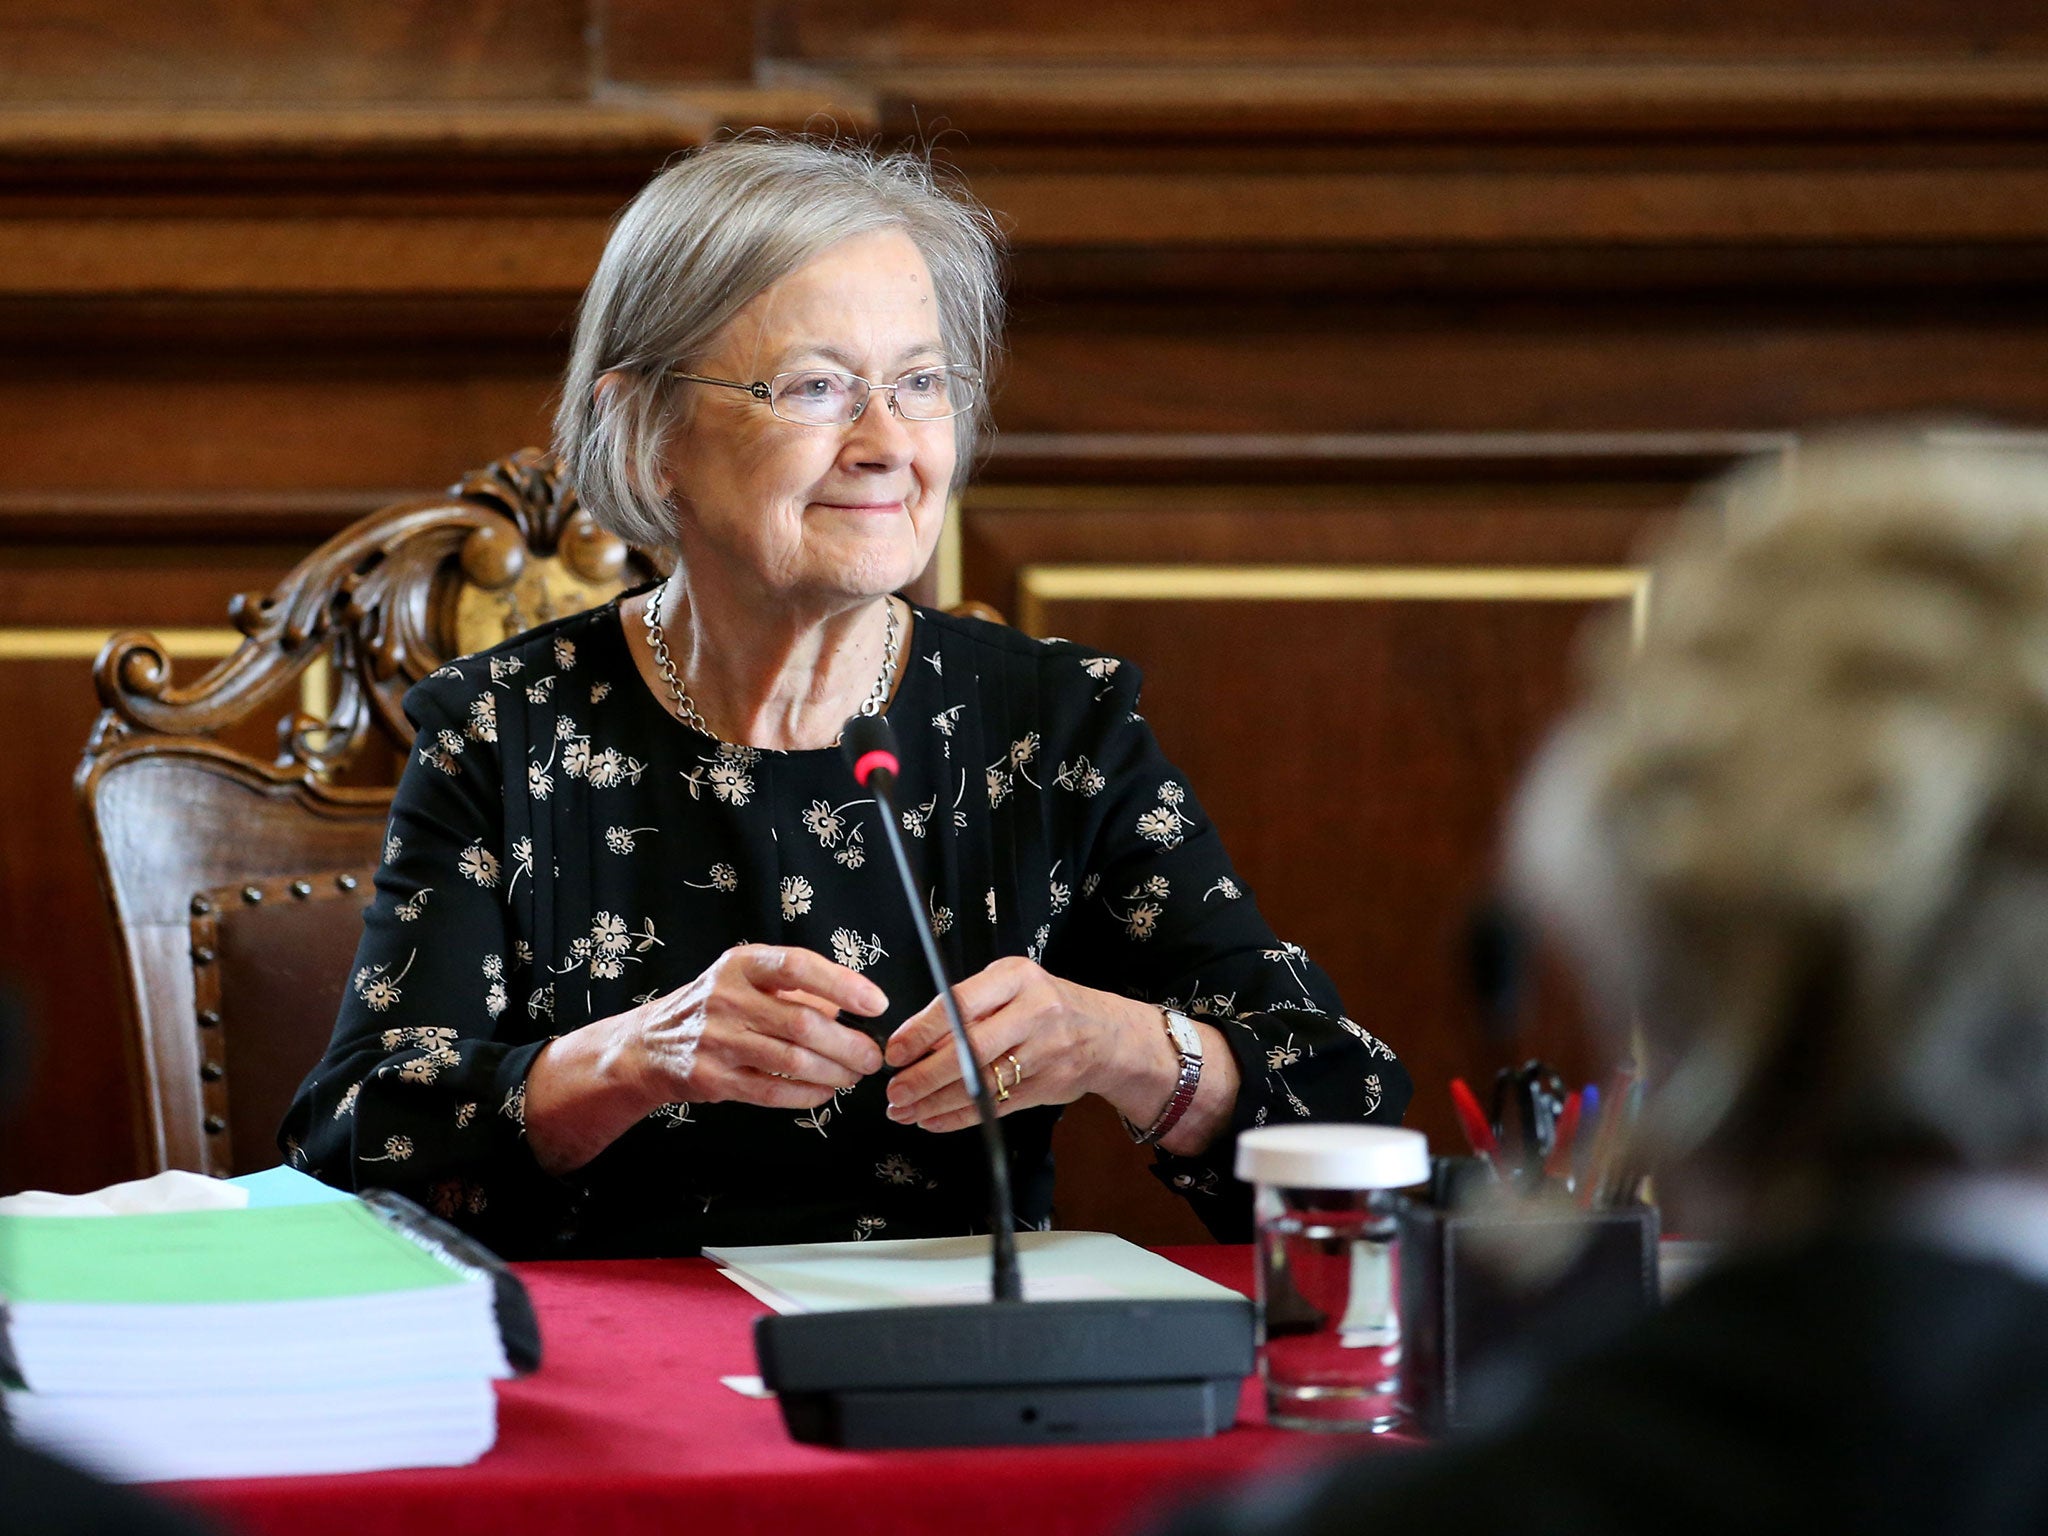 Baroness Hale of Richmond, who is about to stand down as president of the Supreme Court